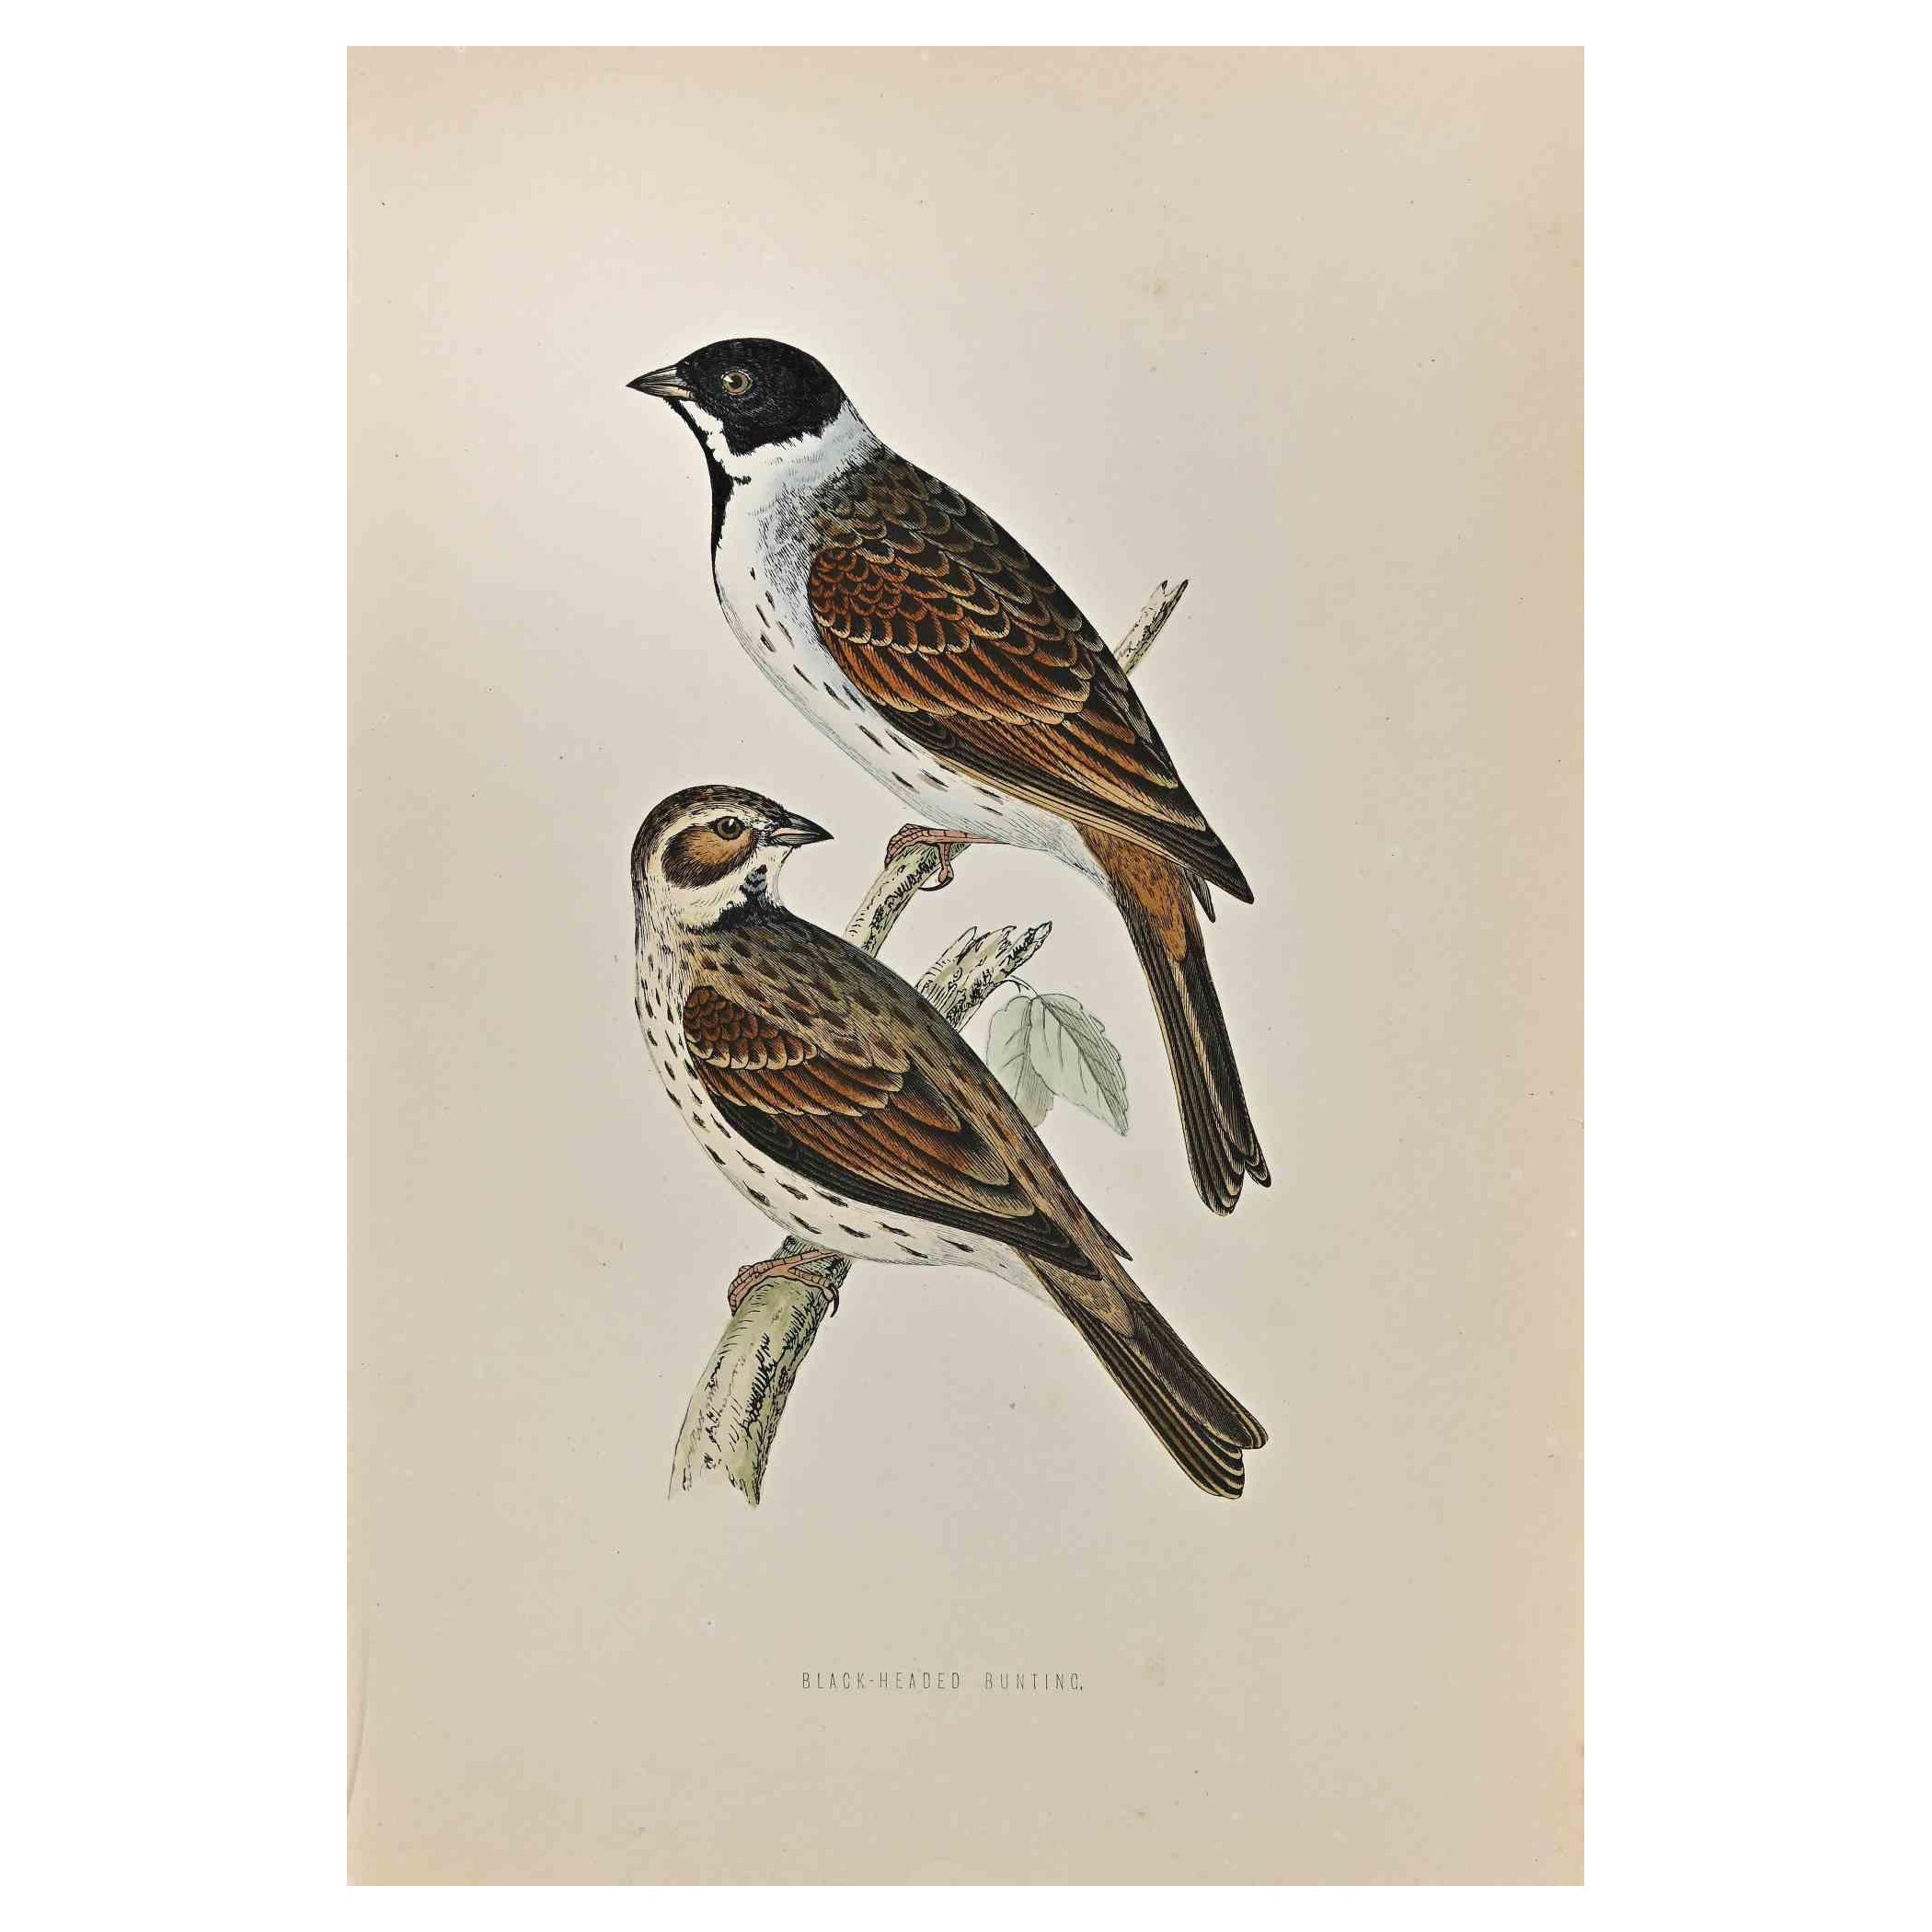 Black-Headed Bunting is a modern artwork realized in 1870 by the British artist Alexander Francis Lydon (1836-1917) . 

Woodcut print, hand colored, published by London, Bell & Sons, 1870.  Name of the bird printed in plate. This work is part of a